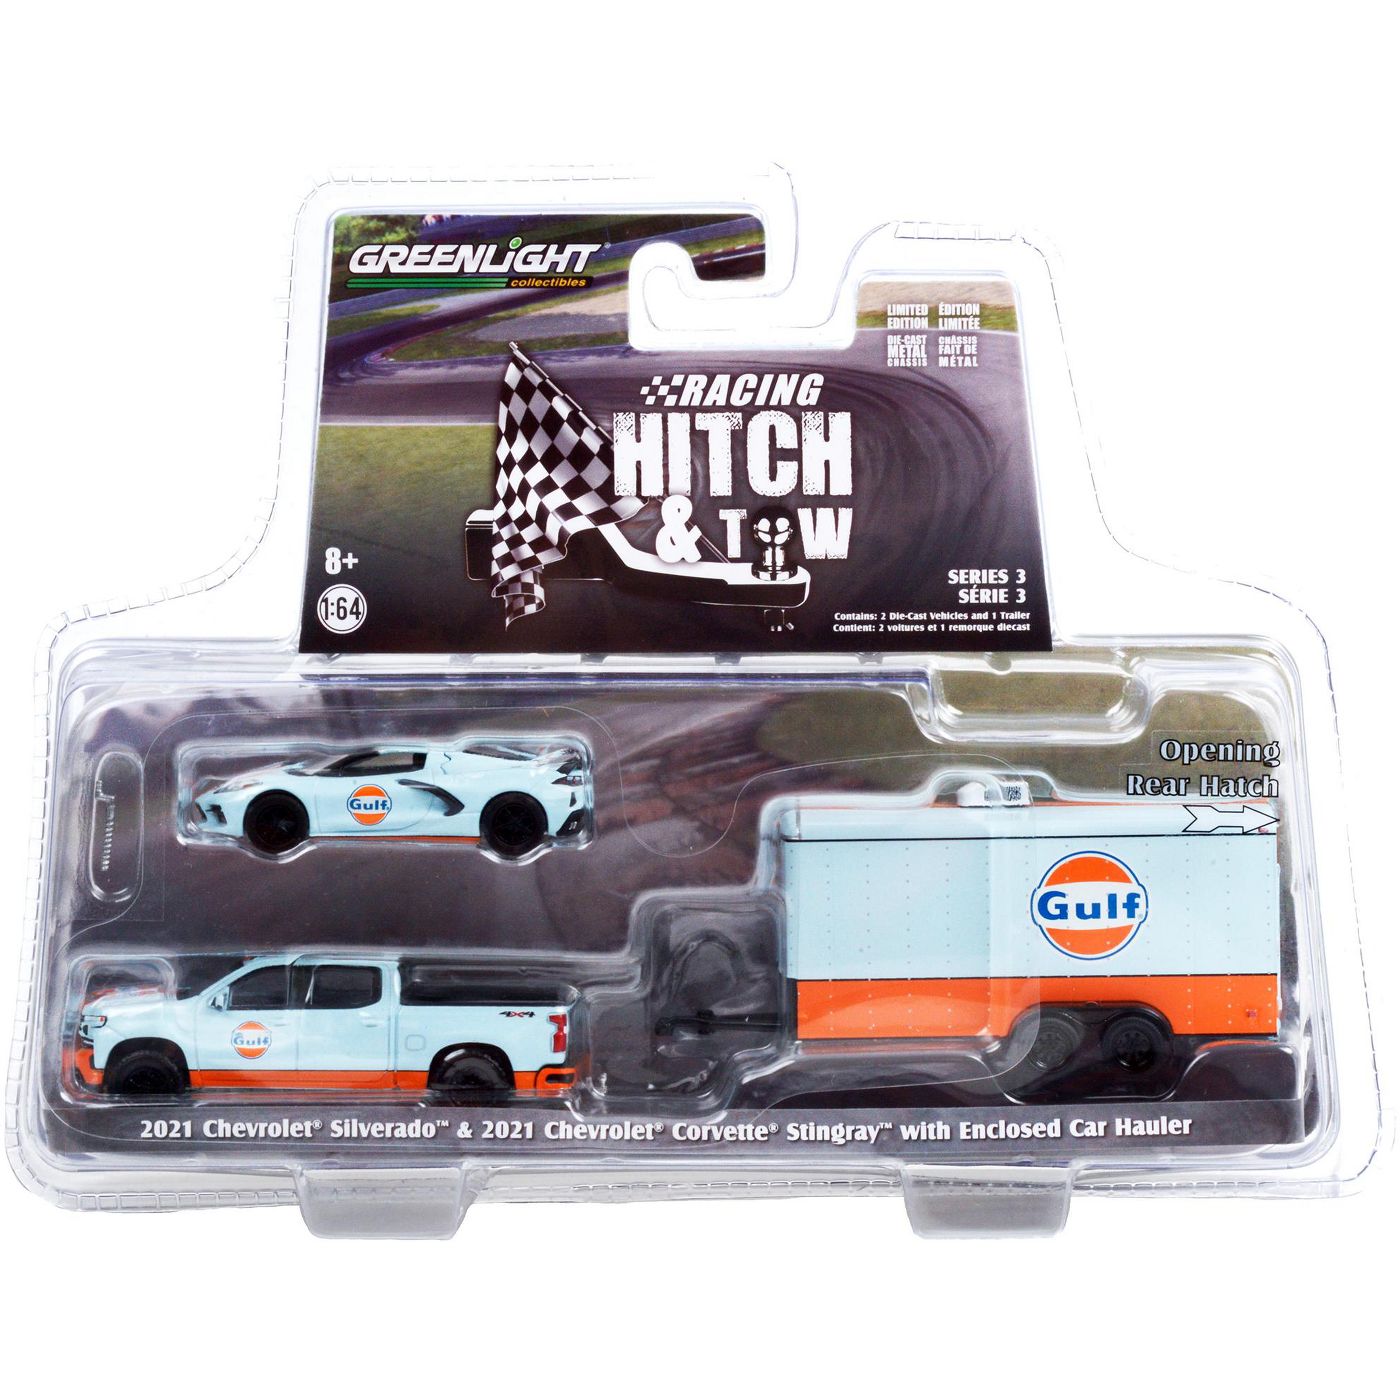 1:64 Racing Hitch & Tow Series 3 -  2021 Chevrolet Silverado and 2021 Corvette C8 Stingray with Enclosed Car Hauler